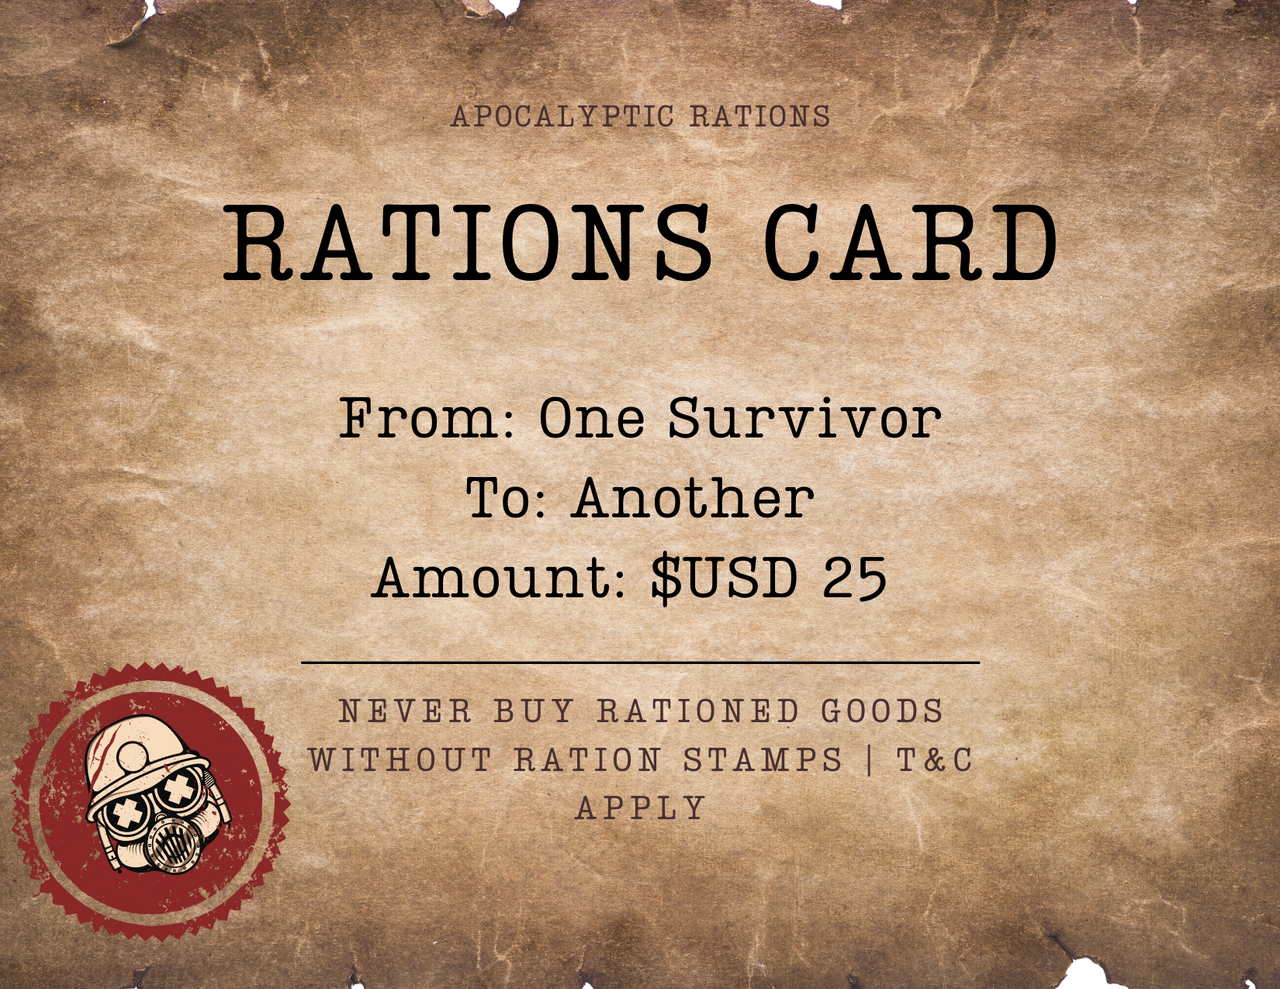 Rations card